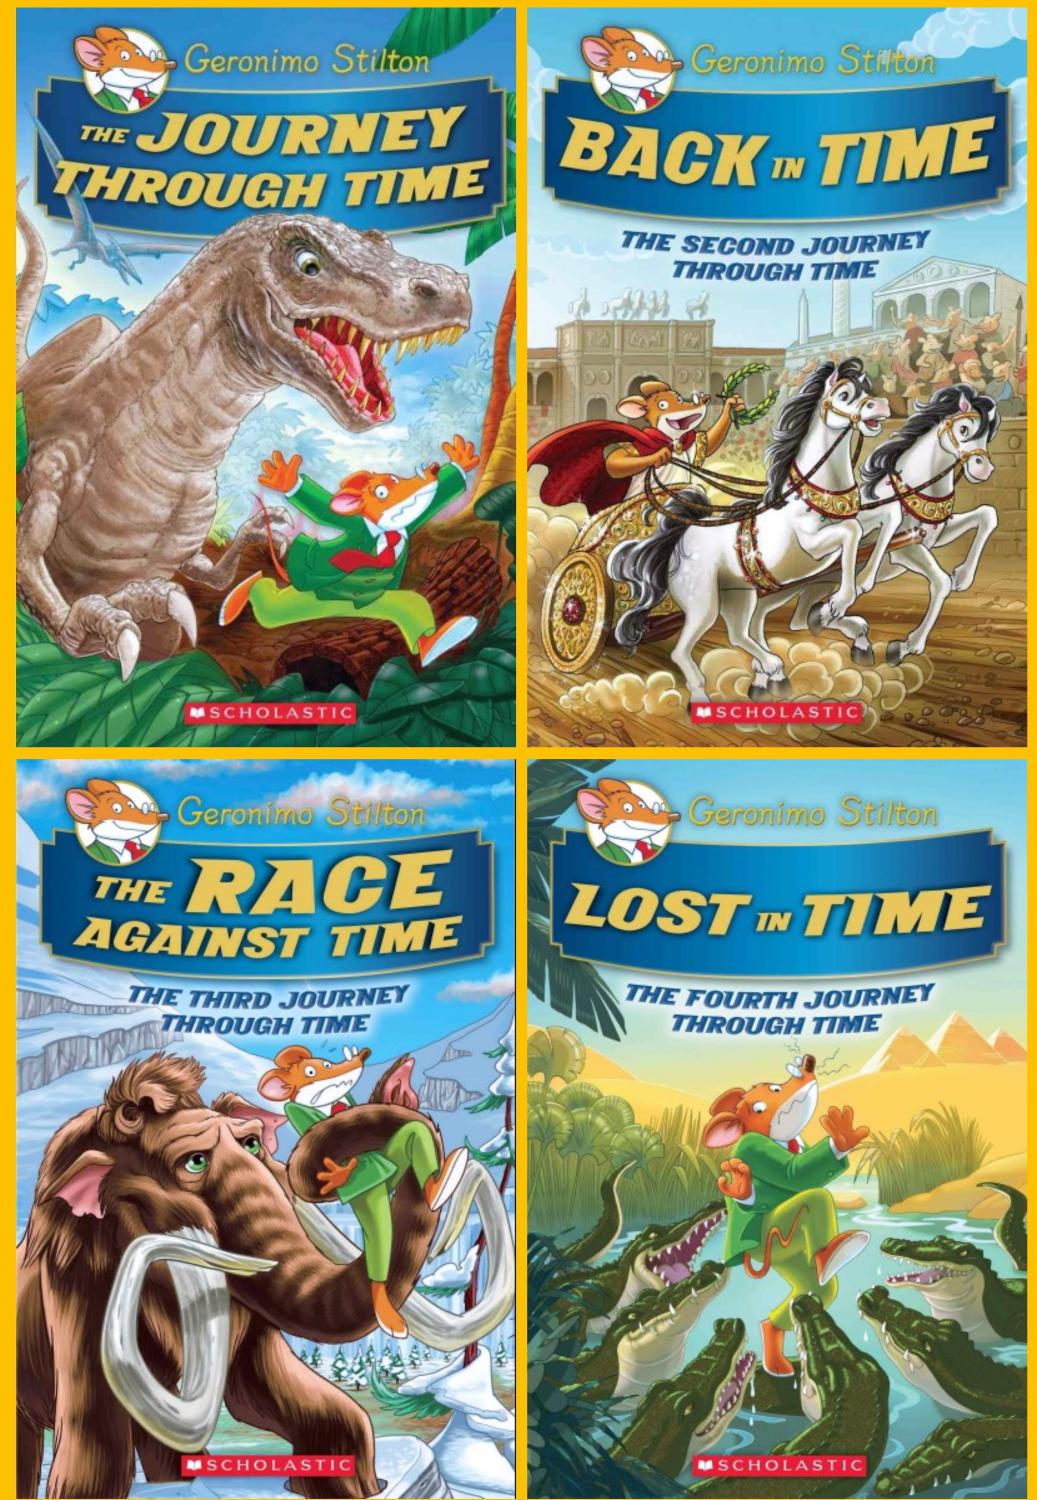 lost in time (geronimo stilton journey through time #4)